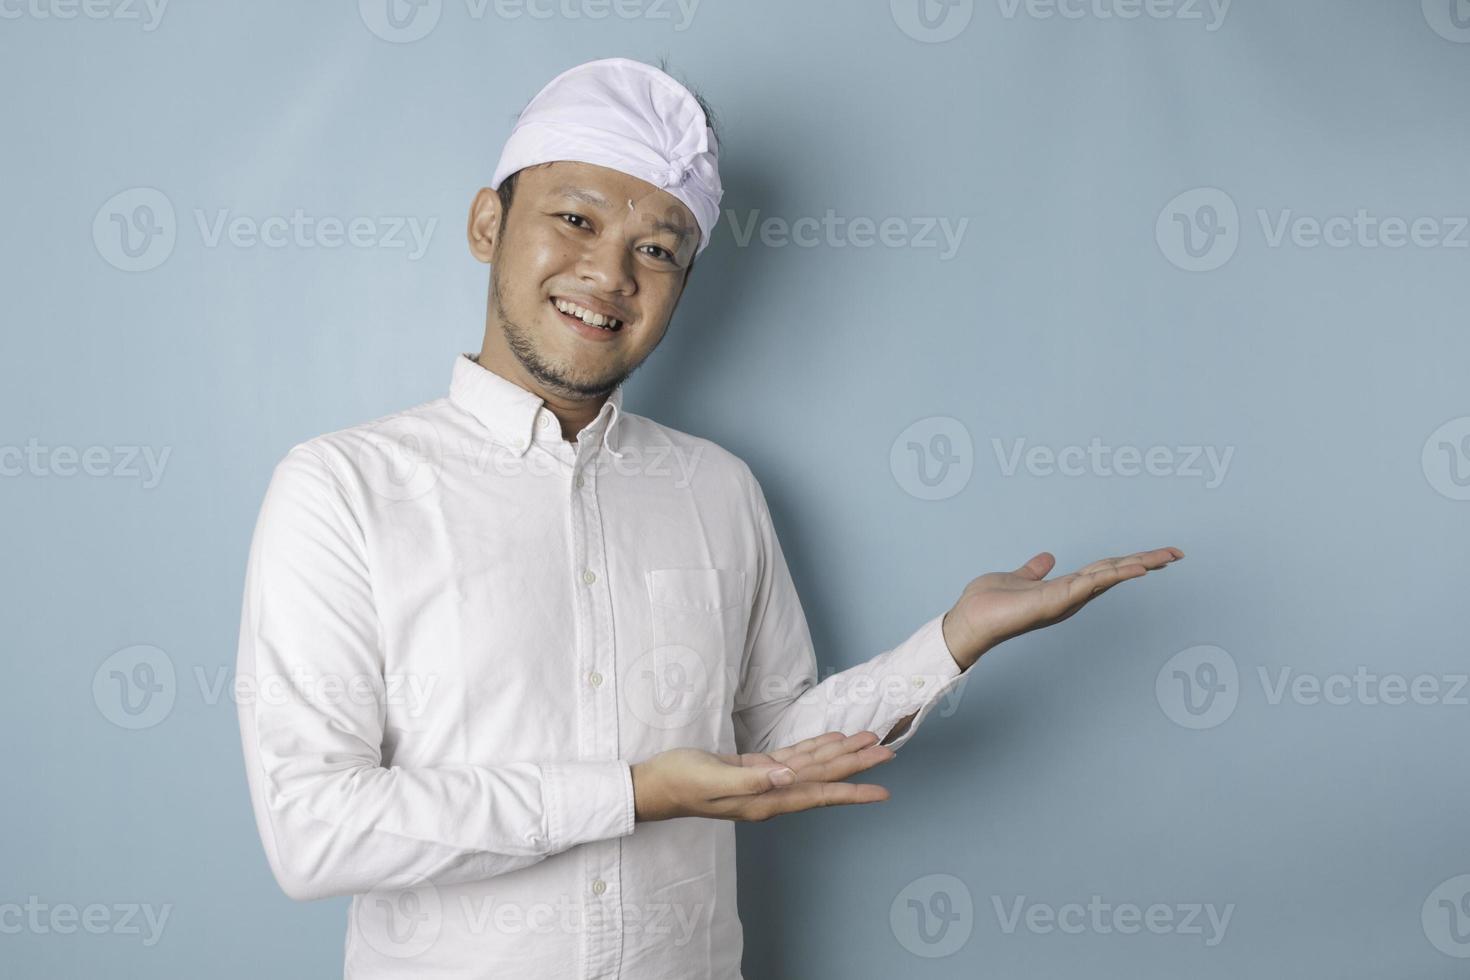 Excited Balinese man wearing udeng or traditional headband and white shirt pointing at the copy space beside him, isolated by blue background photo